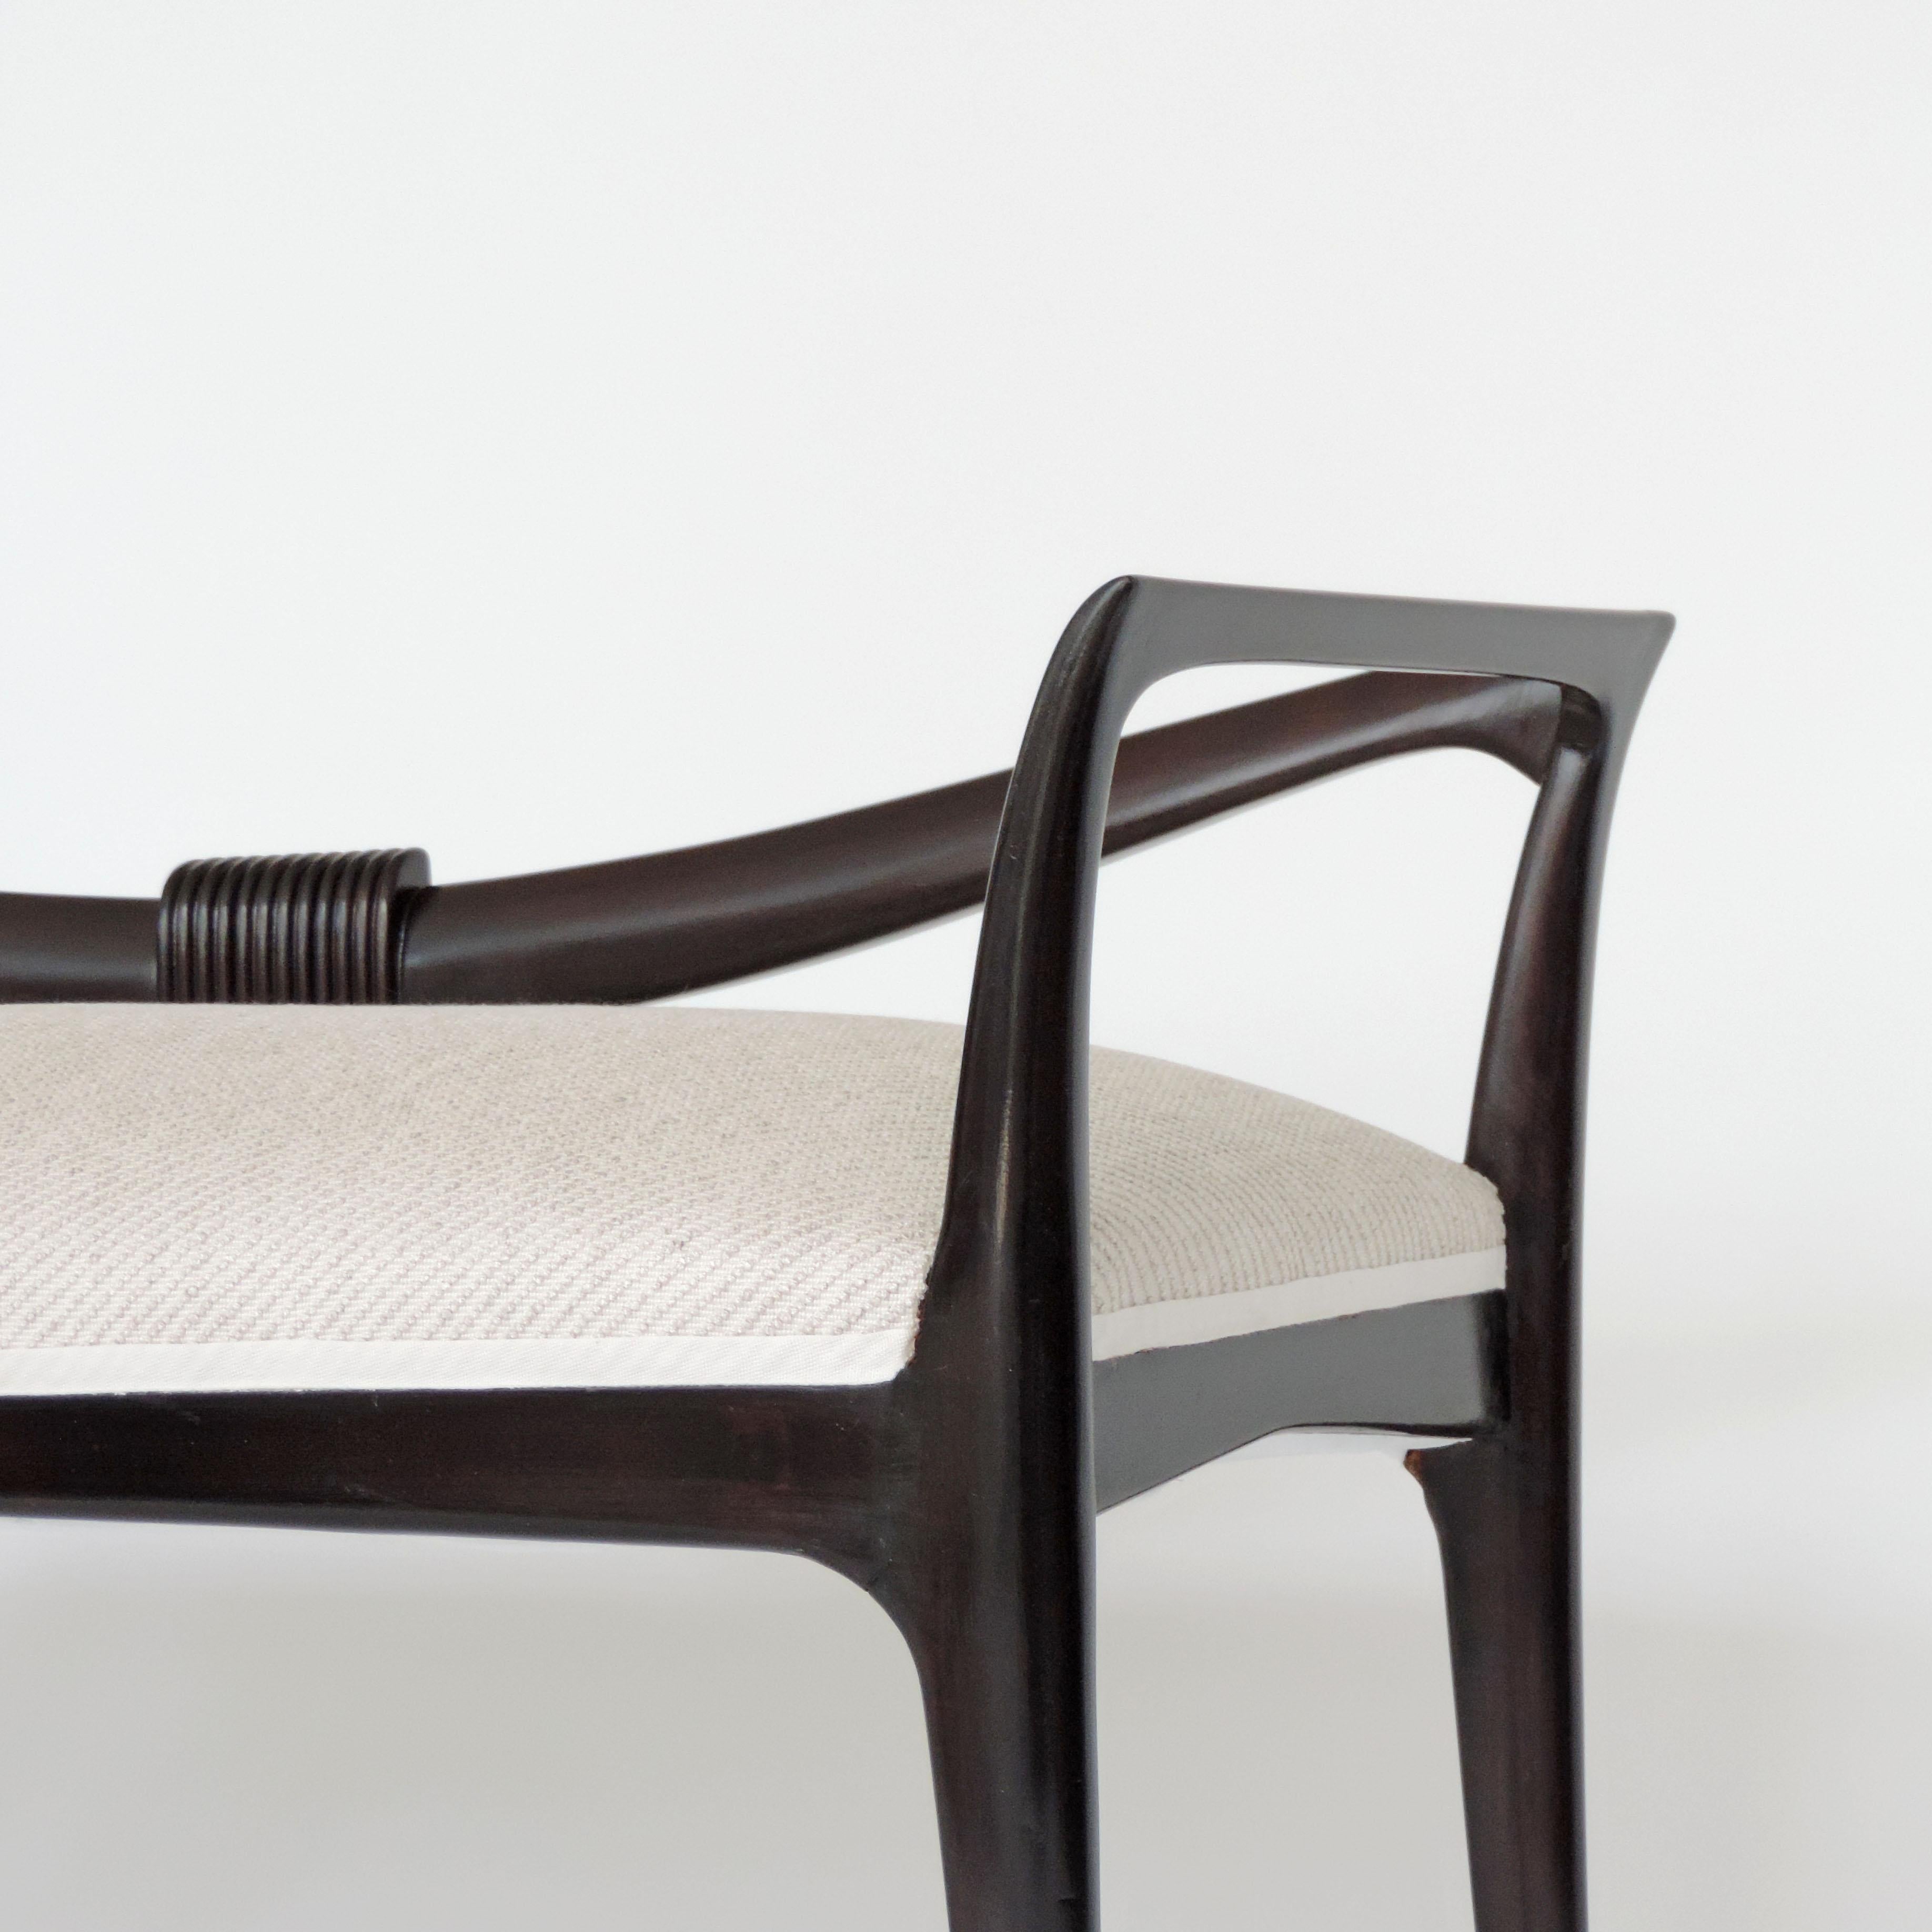 Mid-20th Century Settee Attributed to Emilio Lancia, Italy, 1940s